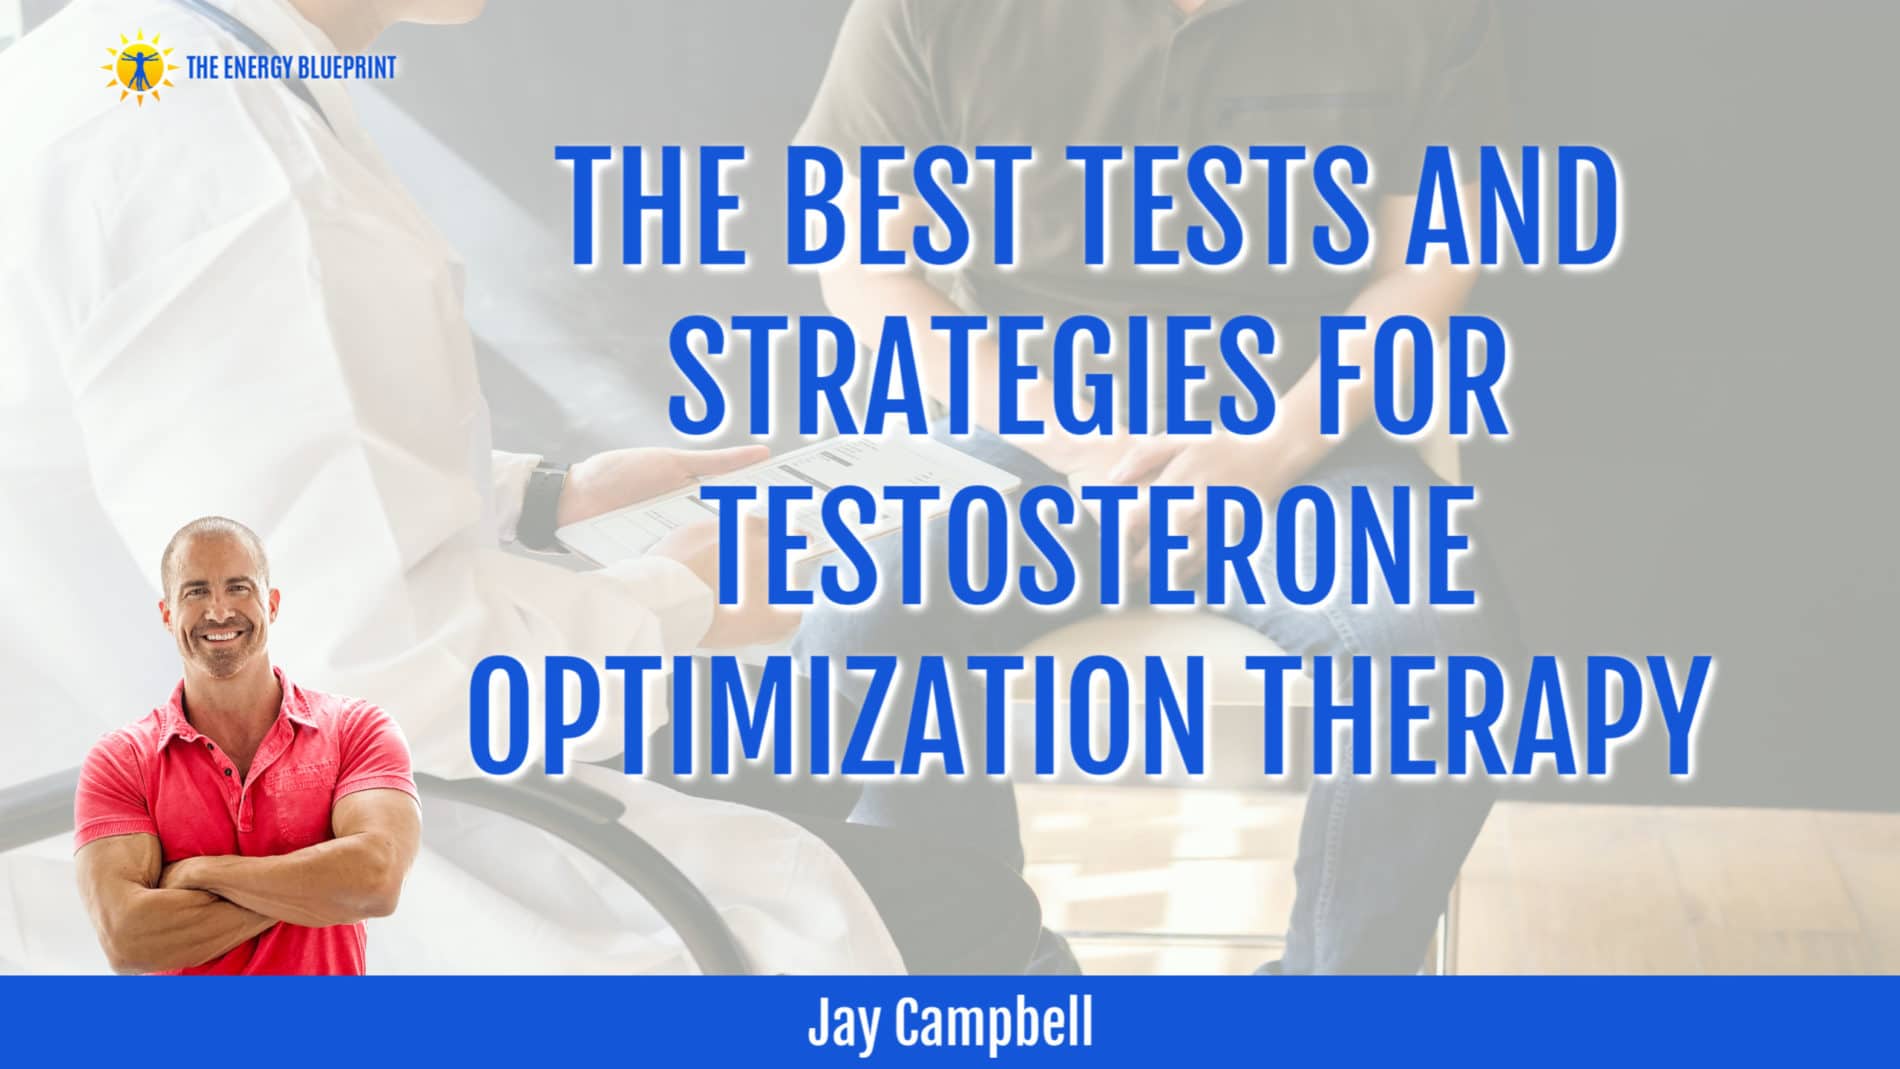 Jay Campbell on THE BEST TESTS AND STRATEGIES FOR TESTOSTERONE OPTIMIZATION THERAPY